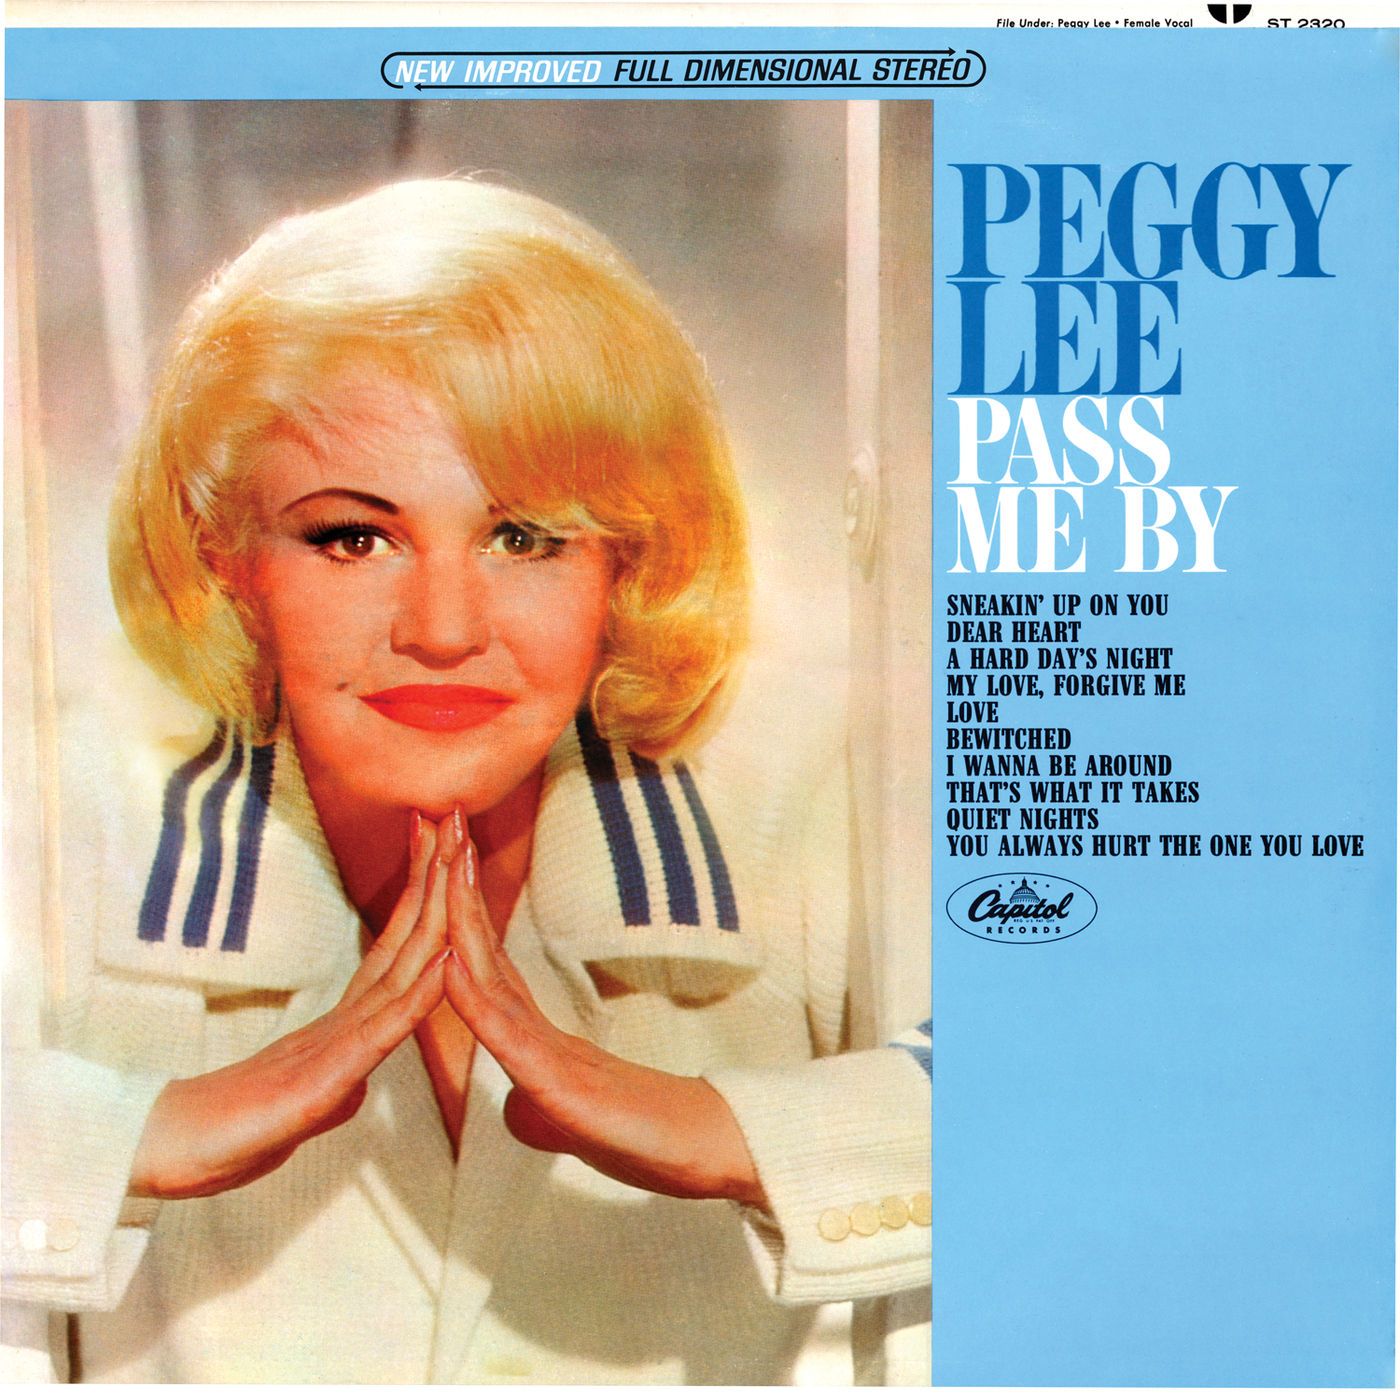 Peggy Lee - Pass Me By (1954/2021) [FLAC 24bit/96kHz]